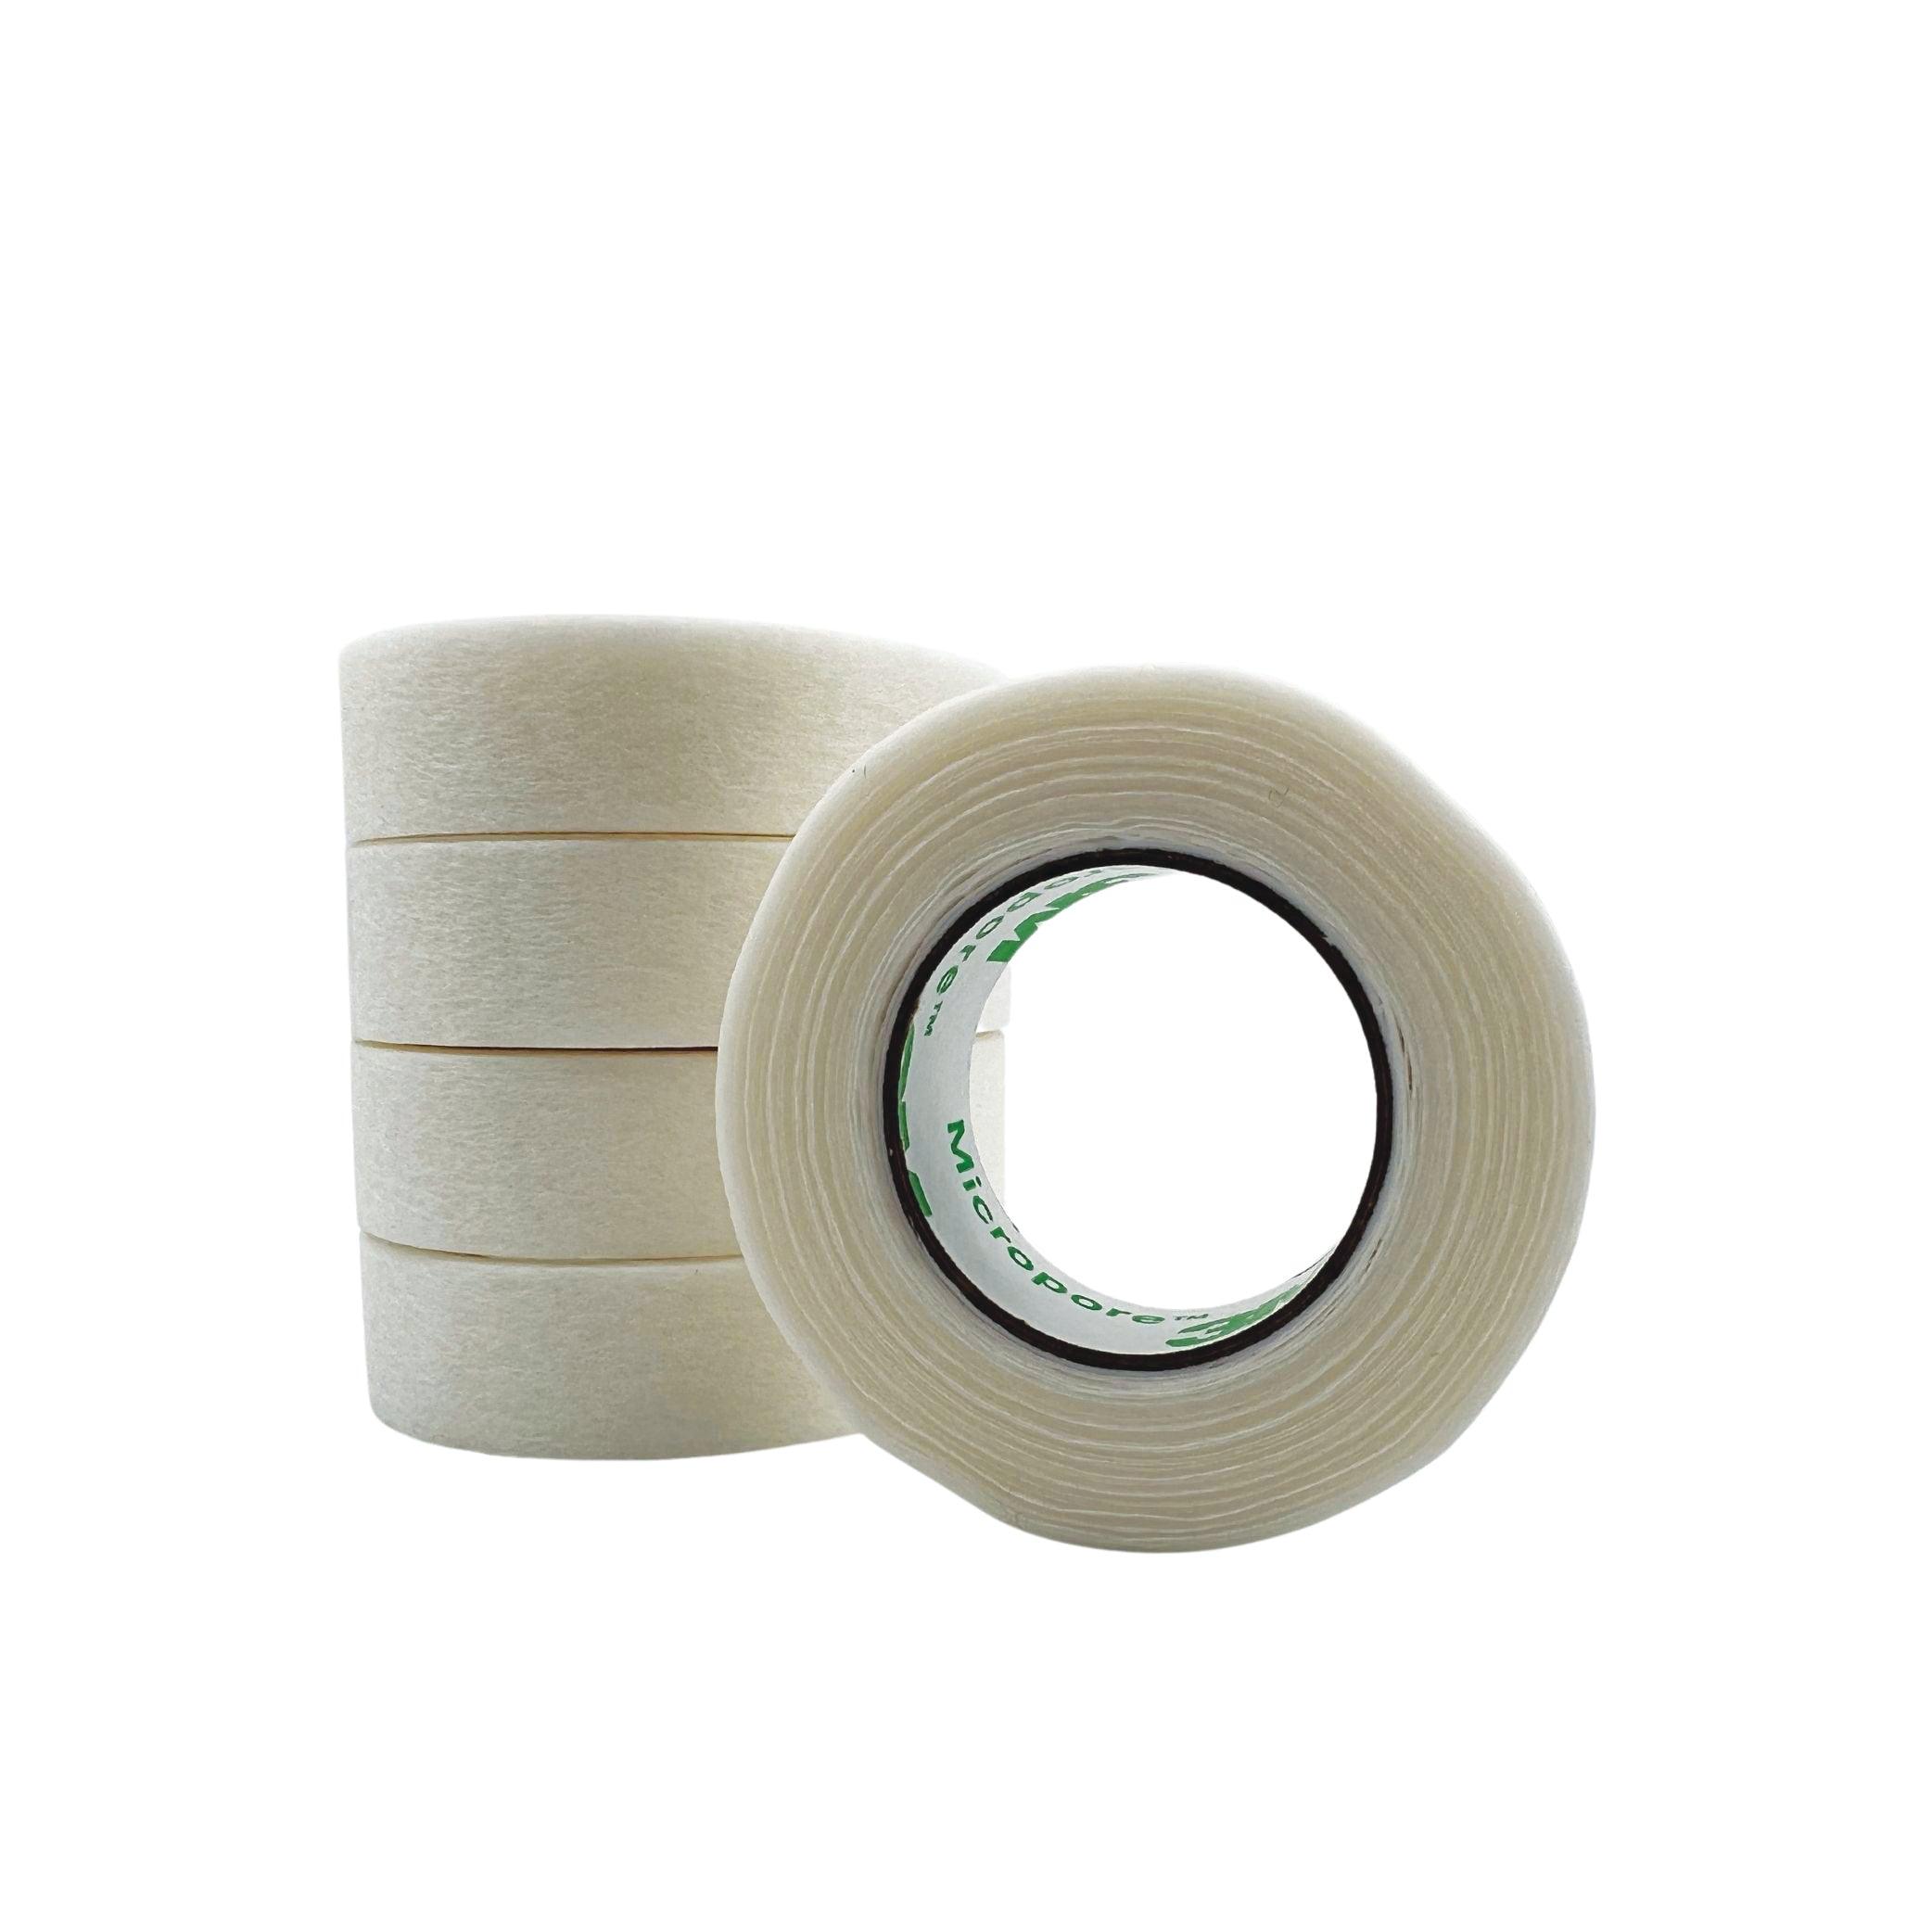 3M Micropore Tape - The Beauty House Shop